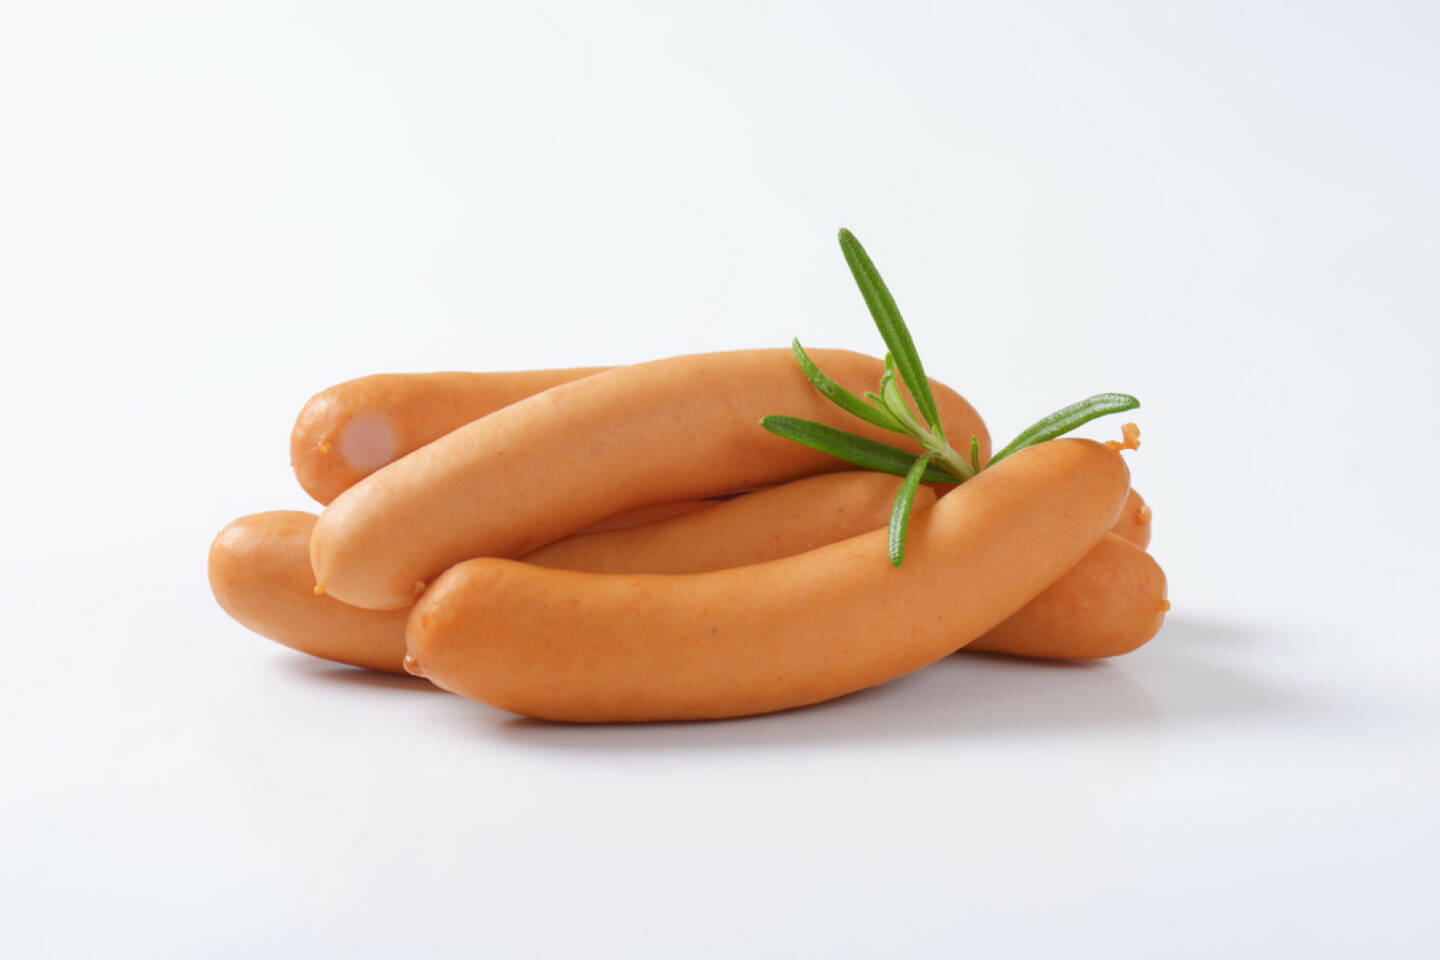 Darm, Wurst, Würstel, http://www.shutterstock.com/de/pic-203670901/stock-photo-cooked-pork-sausages-decorated-with-rosemary.html